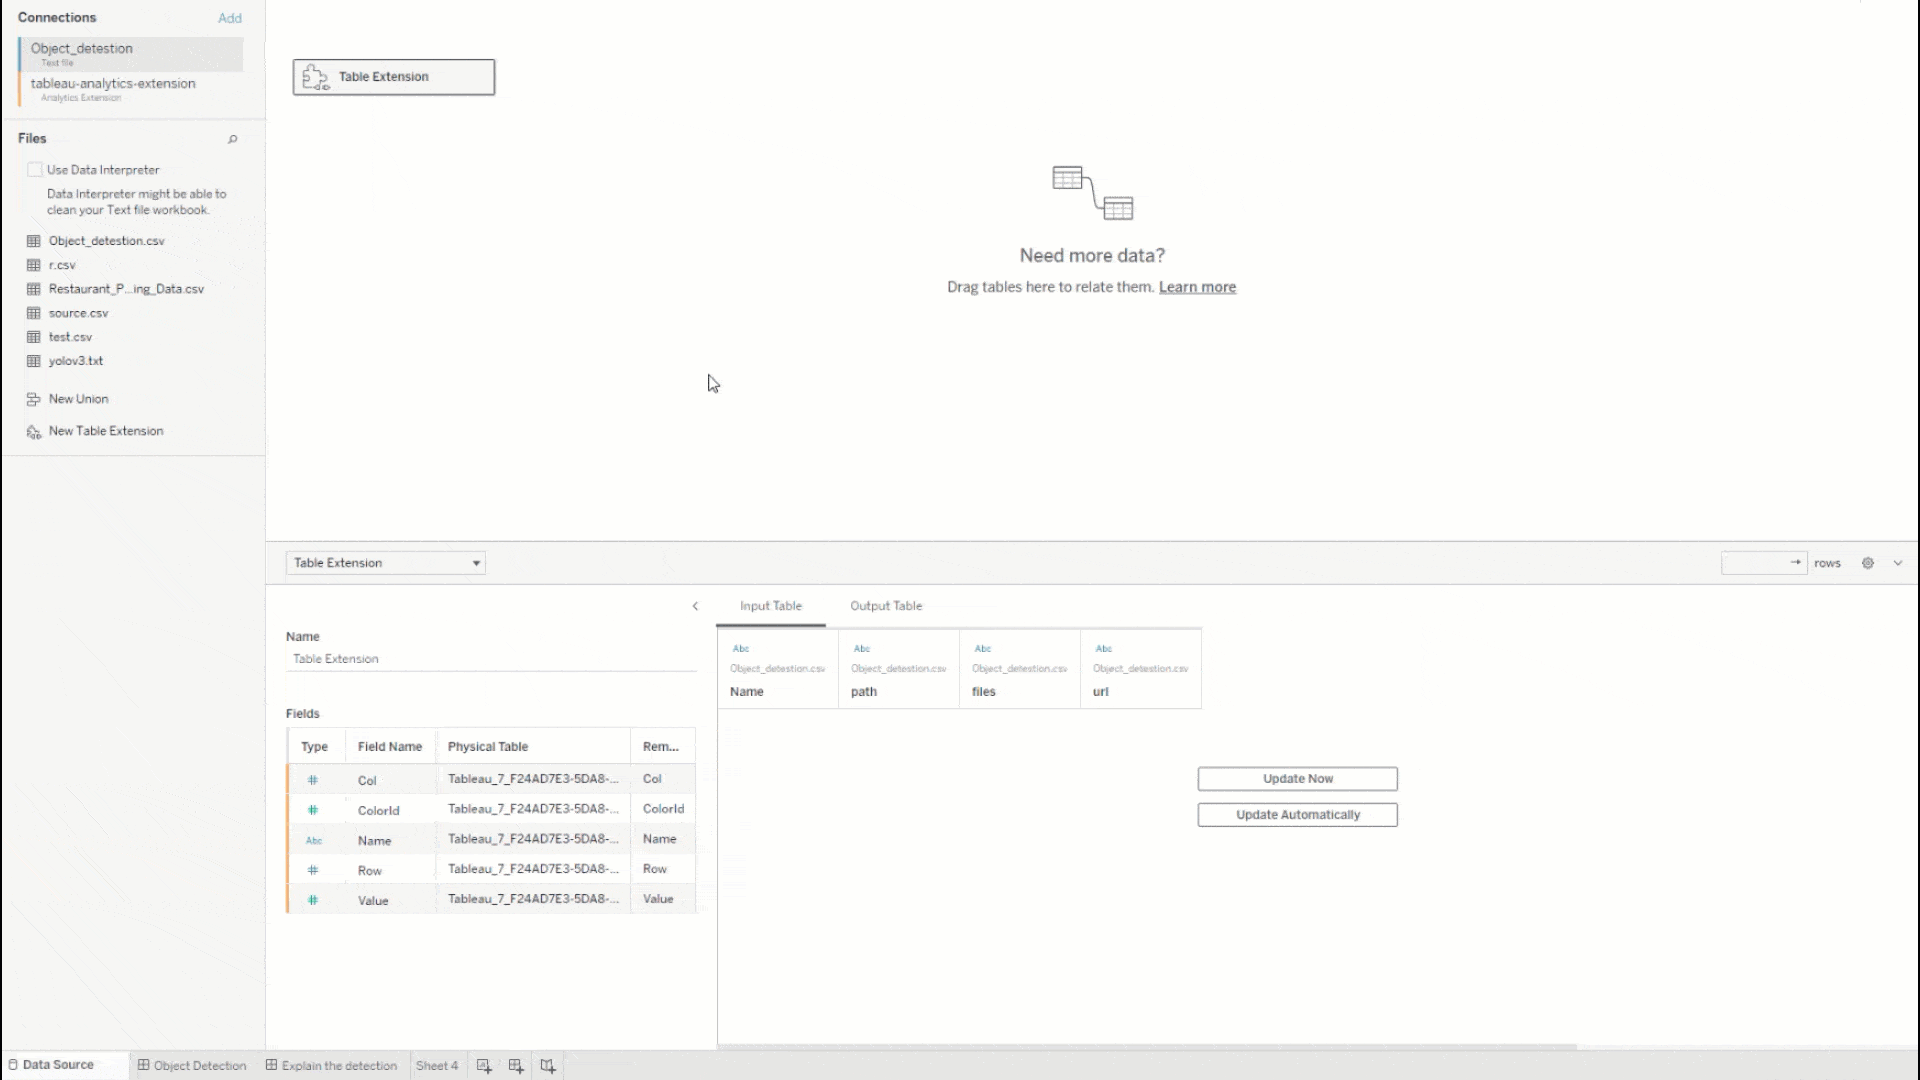 Animated GIF of the Tableau web authoring interface showing the user connecting a Table Extension through TabPy, producing an output table and filtering through visualisations using data from the output table.